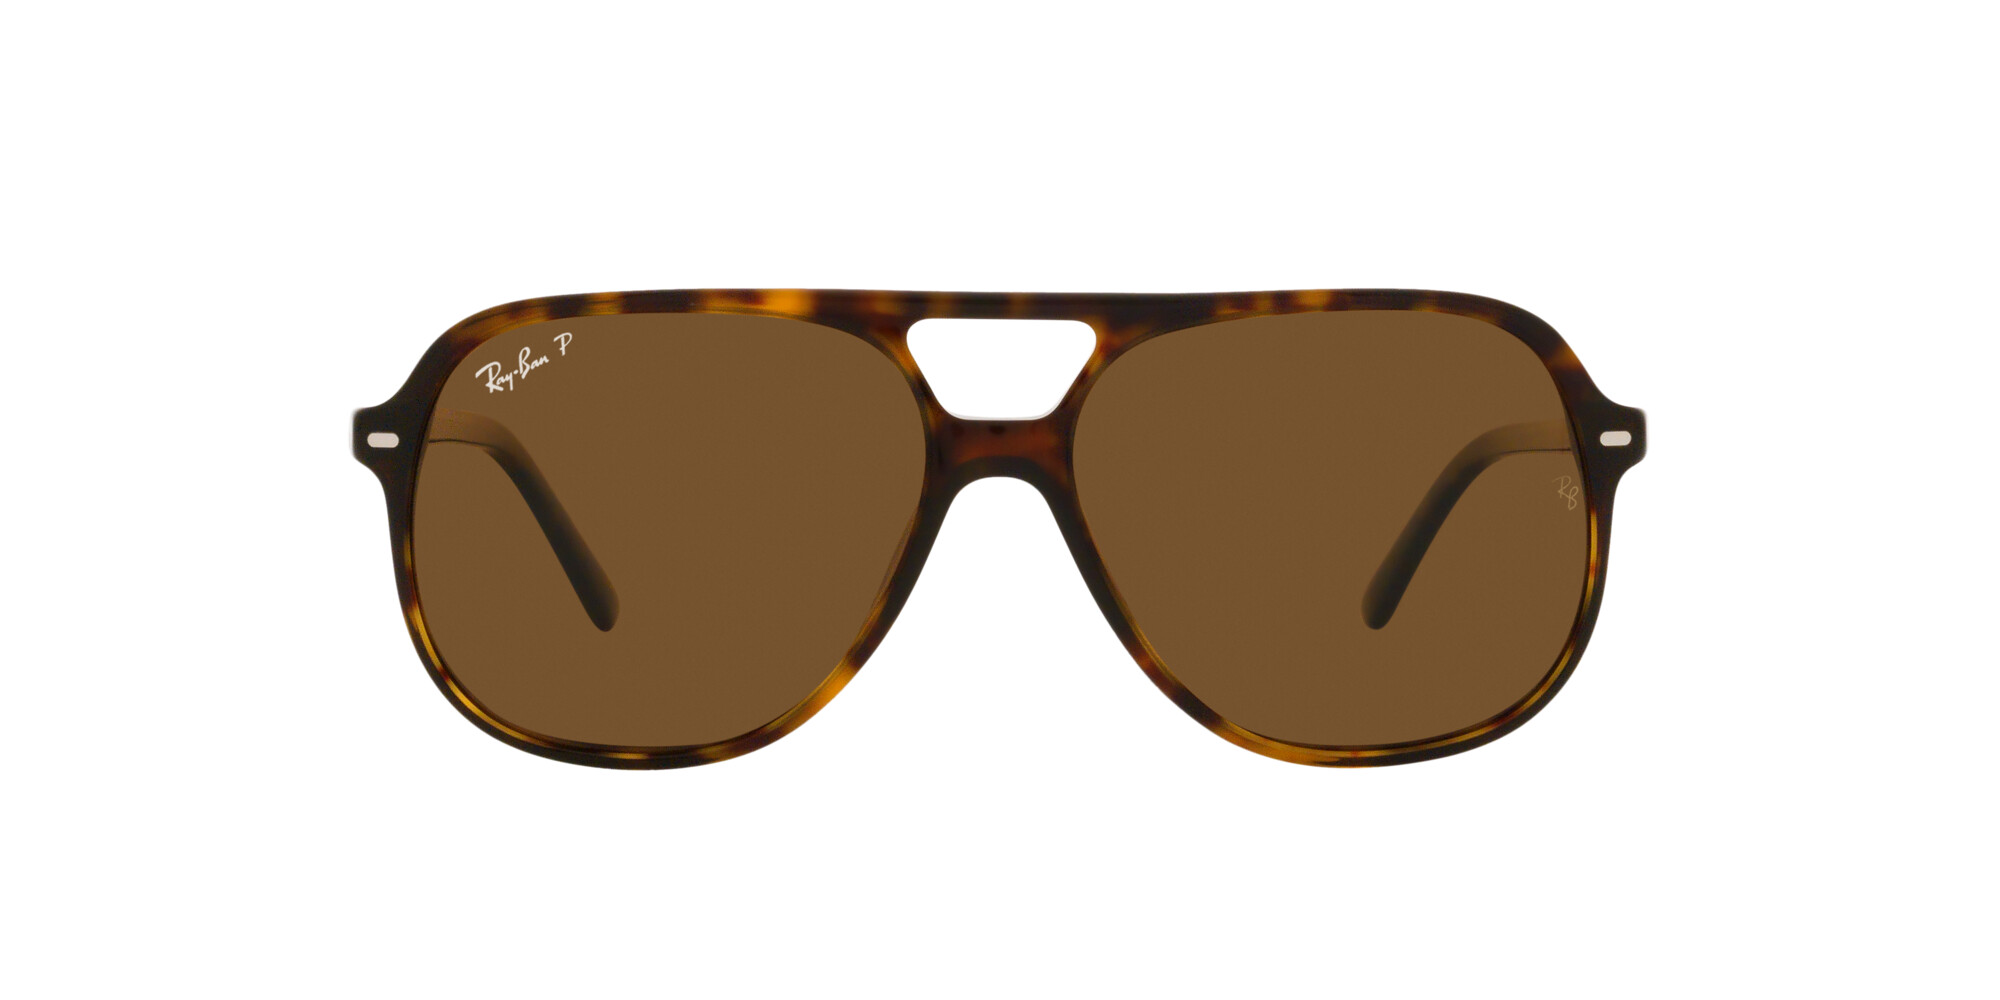 [products.image.front] Ray-Ban BILL 0RB2198 902/57 Sonnenbrille